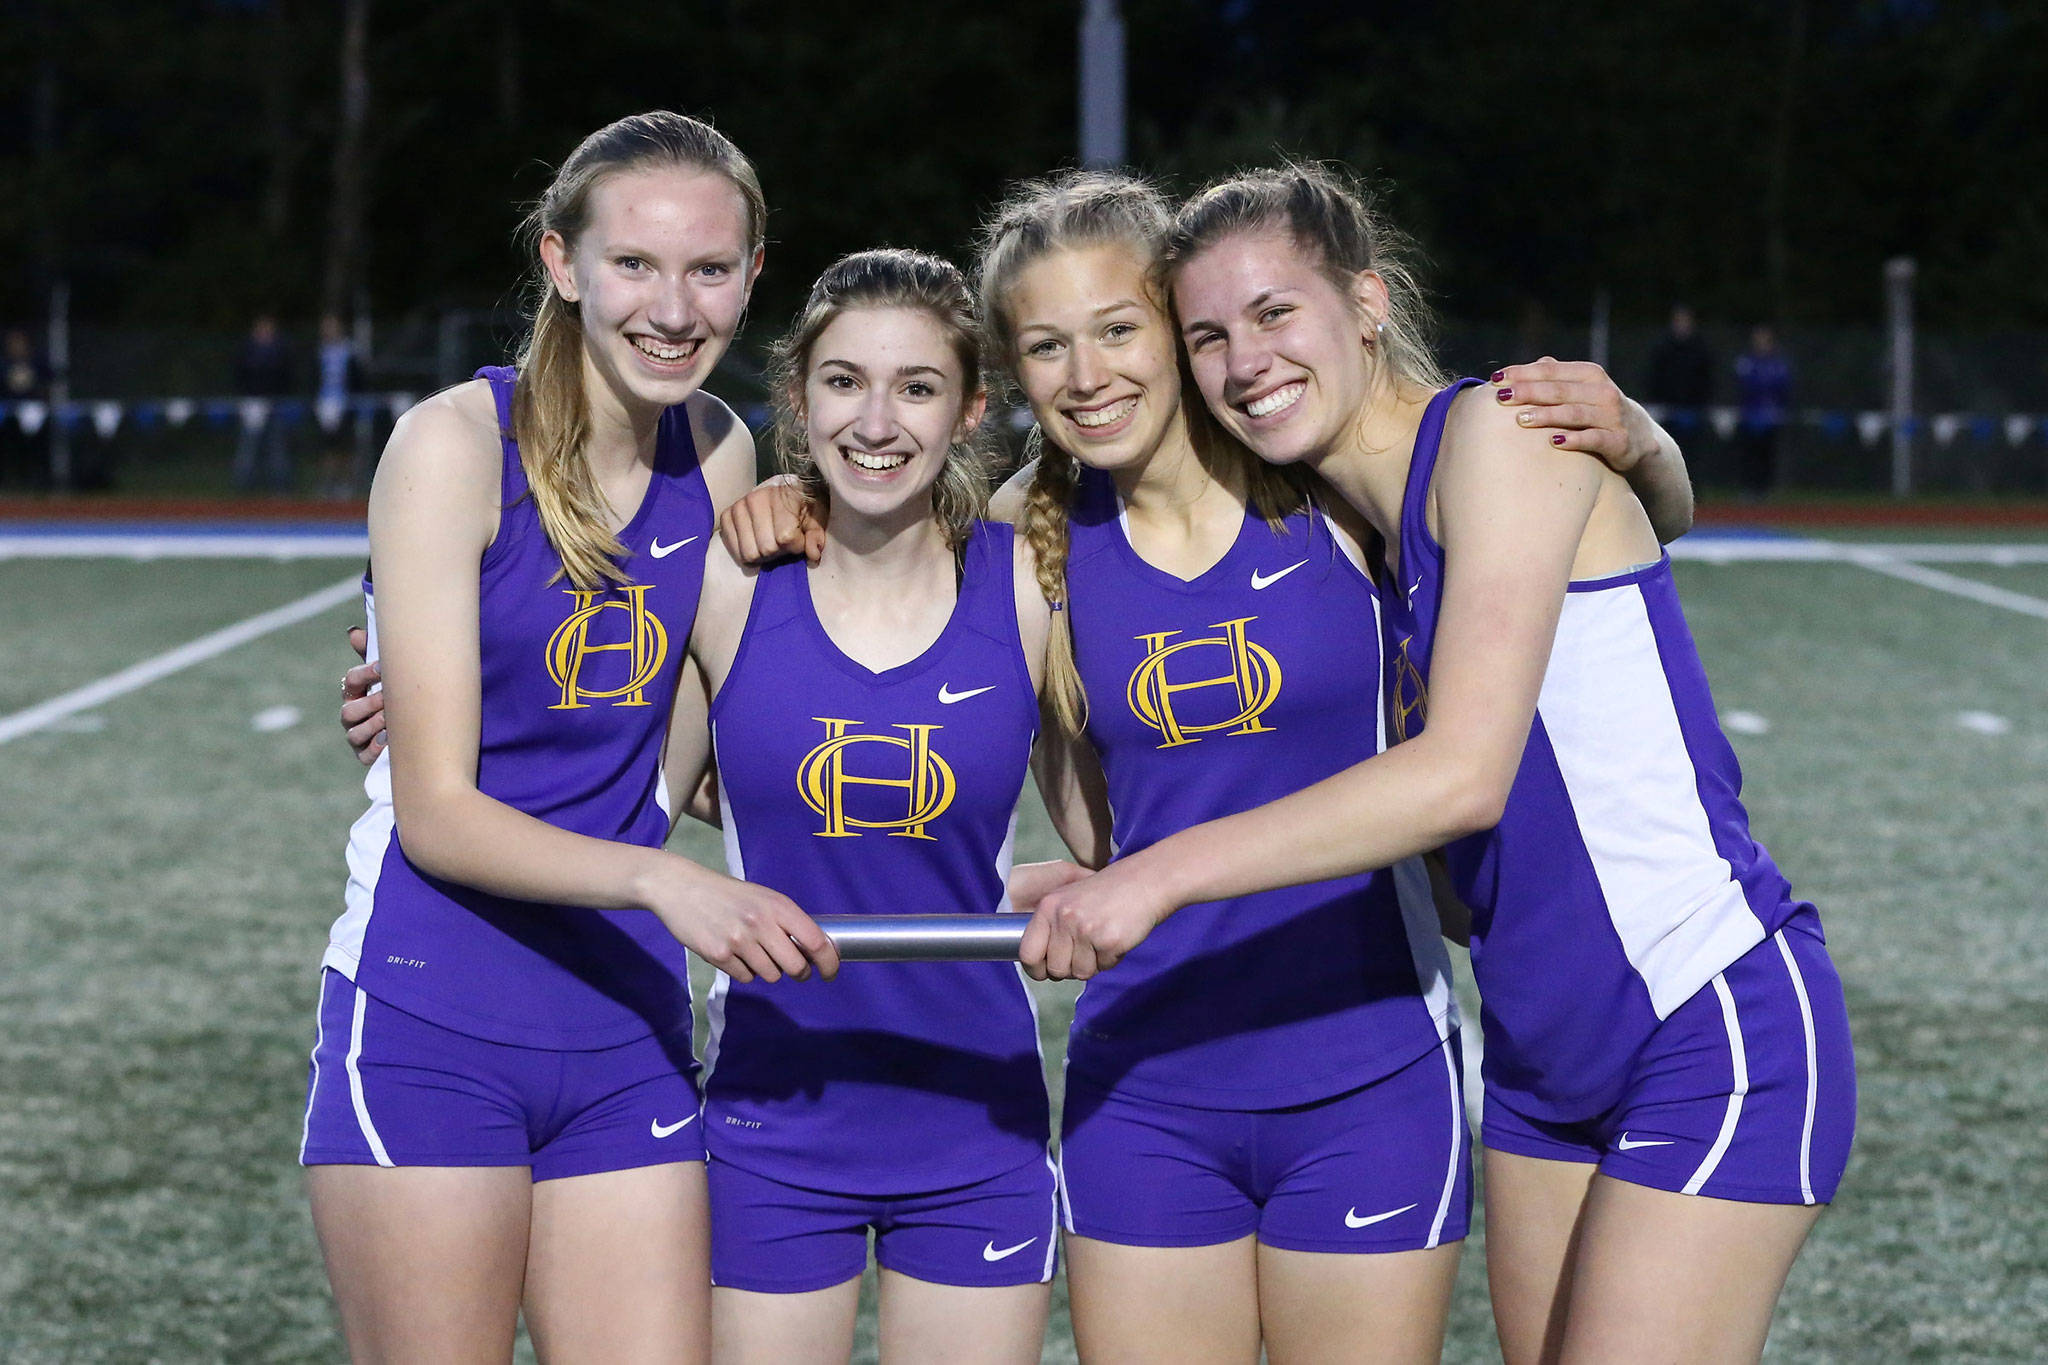 Oak Harbo’s 4x400 relay team of Courtney VanGiesen, left, Brenna Rothman, Natalie Frech and Morgan Pease placed fourth in the district meet, good for a berth in the state meet. (Photo by John Fisken)